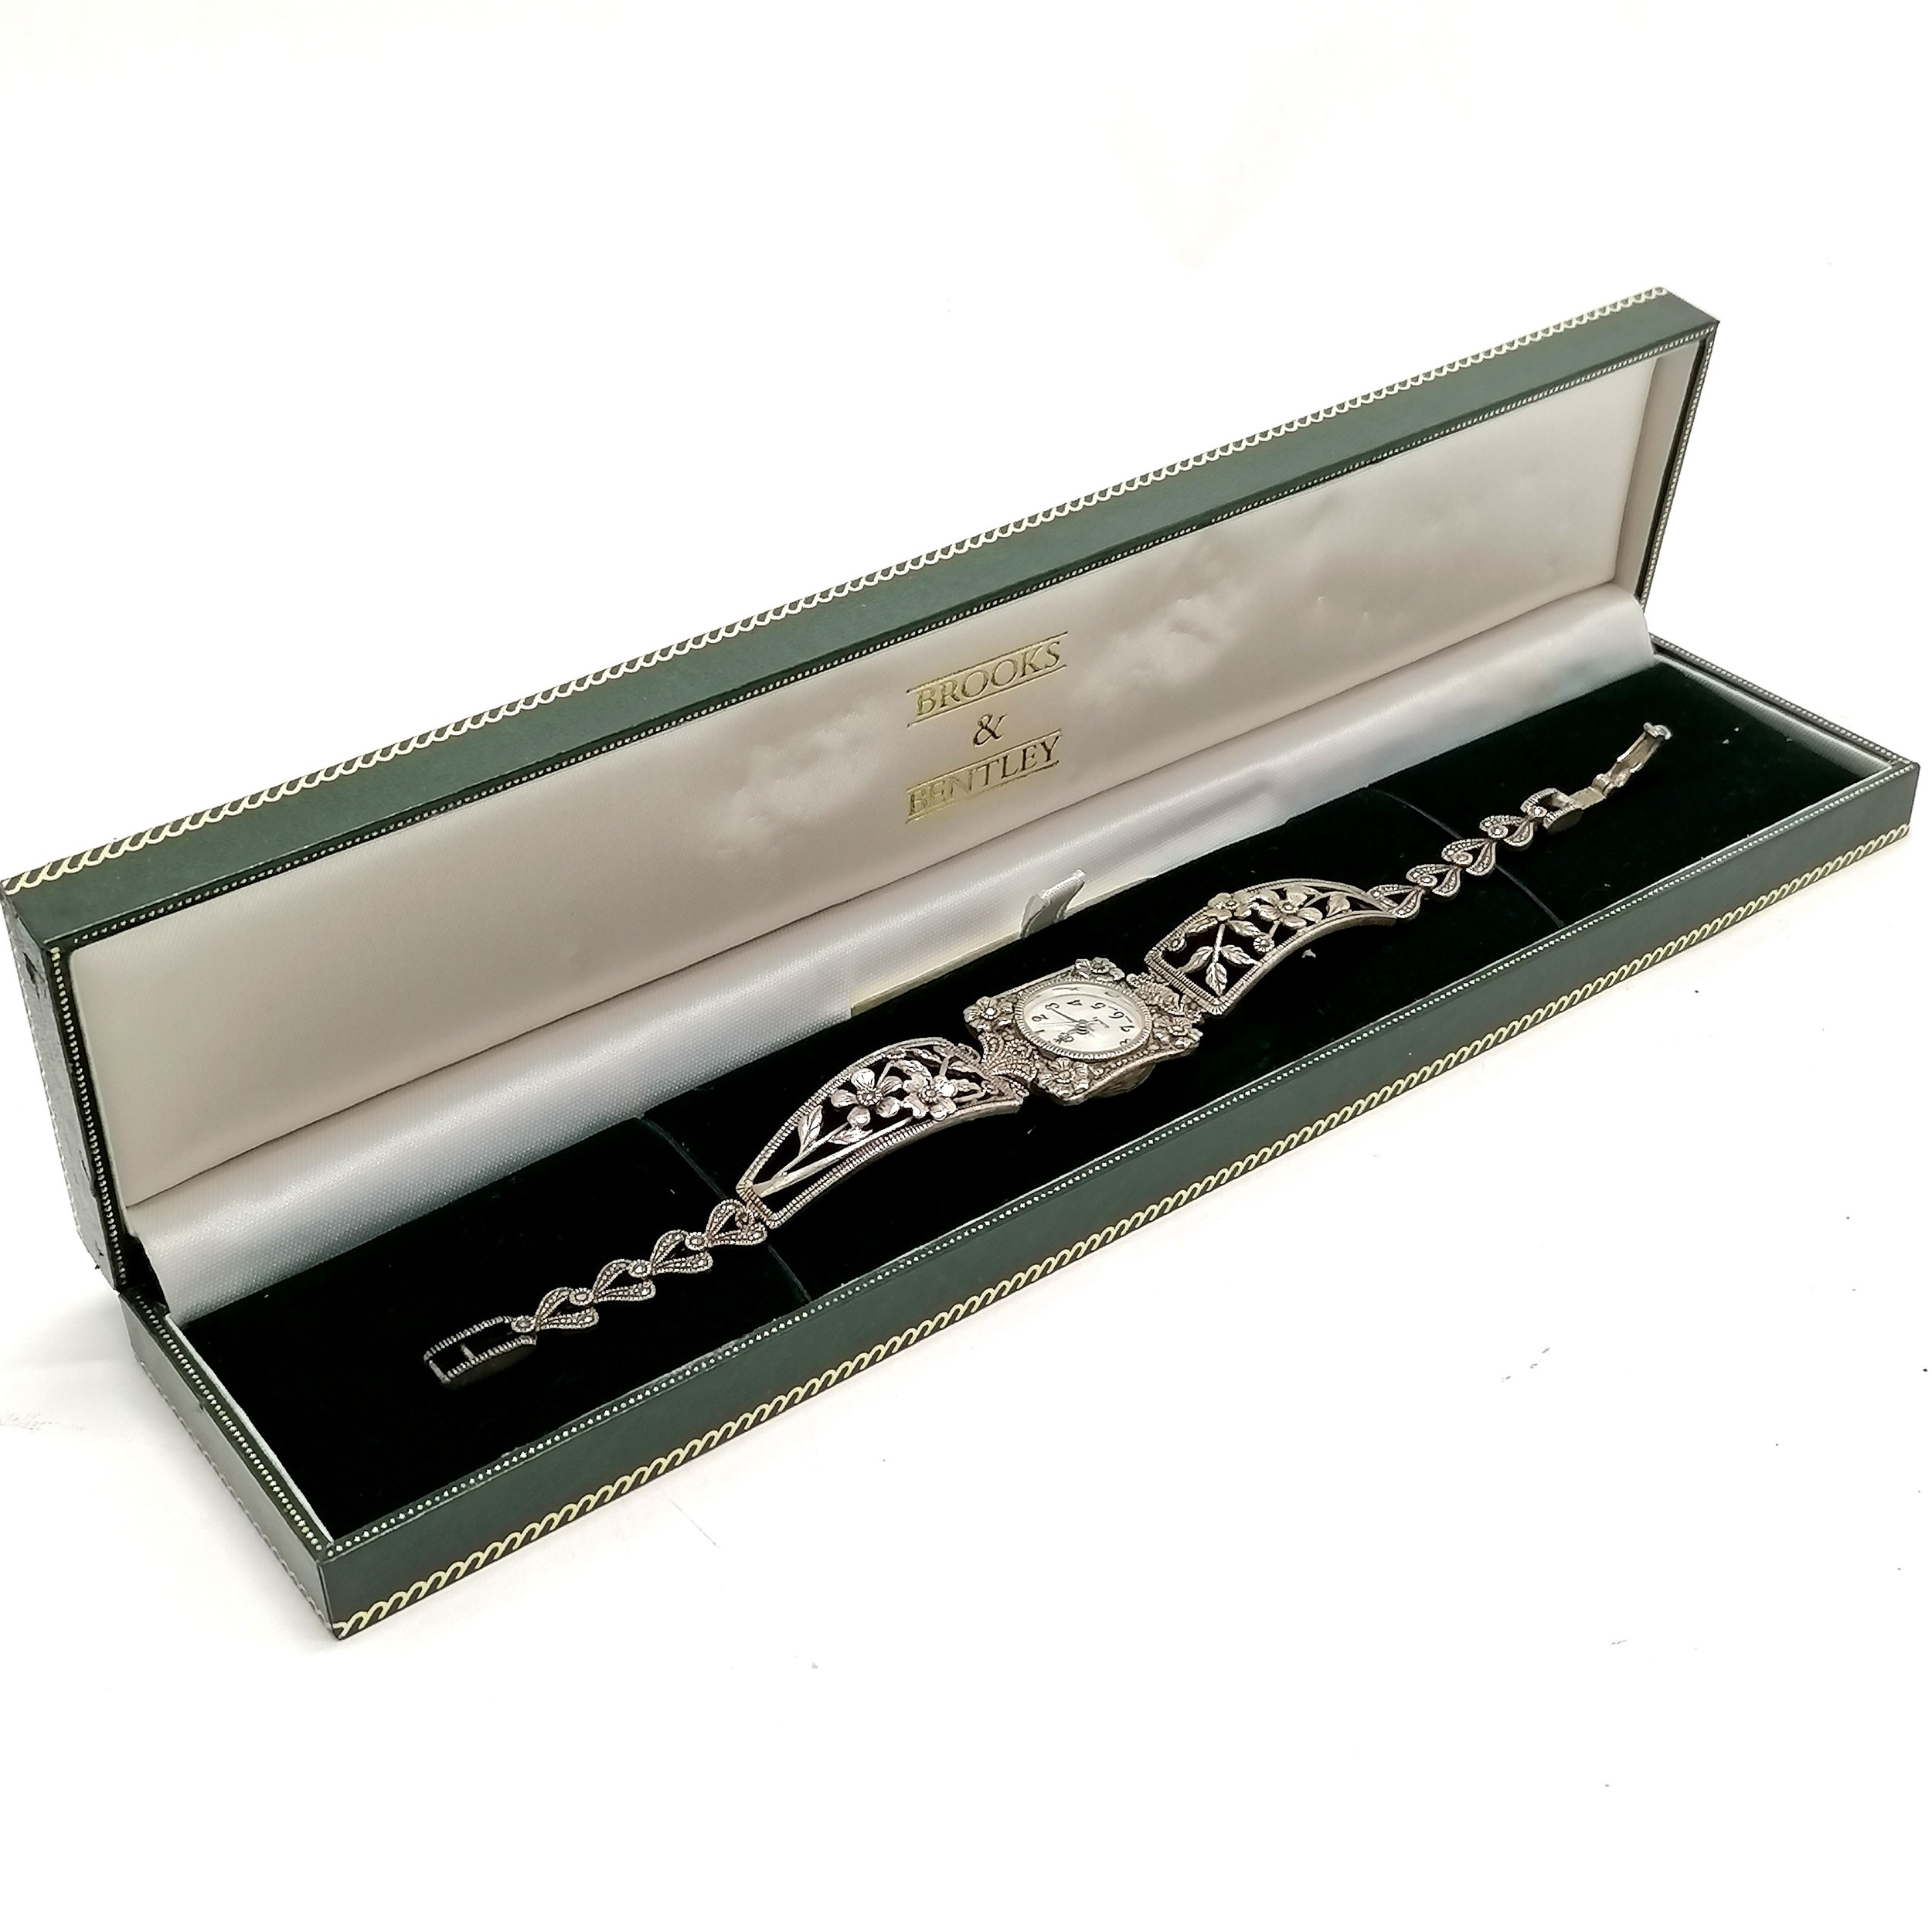 Sterling silver quartz ladies wristwatch with marcasite stone set detail - 18cm long & 25g in a